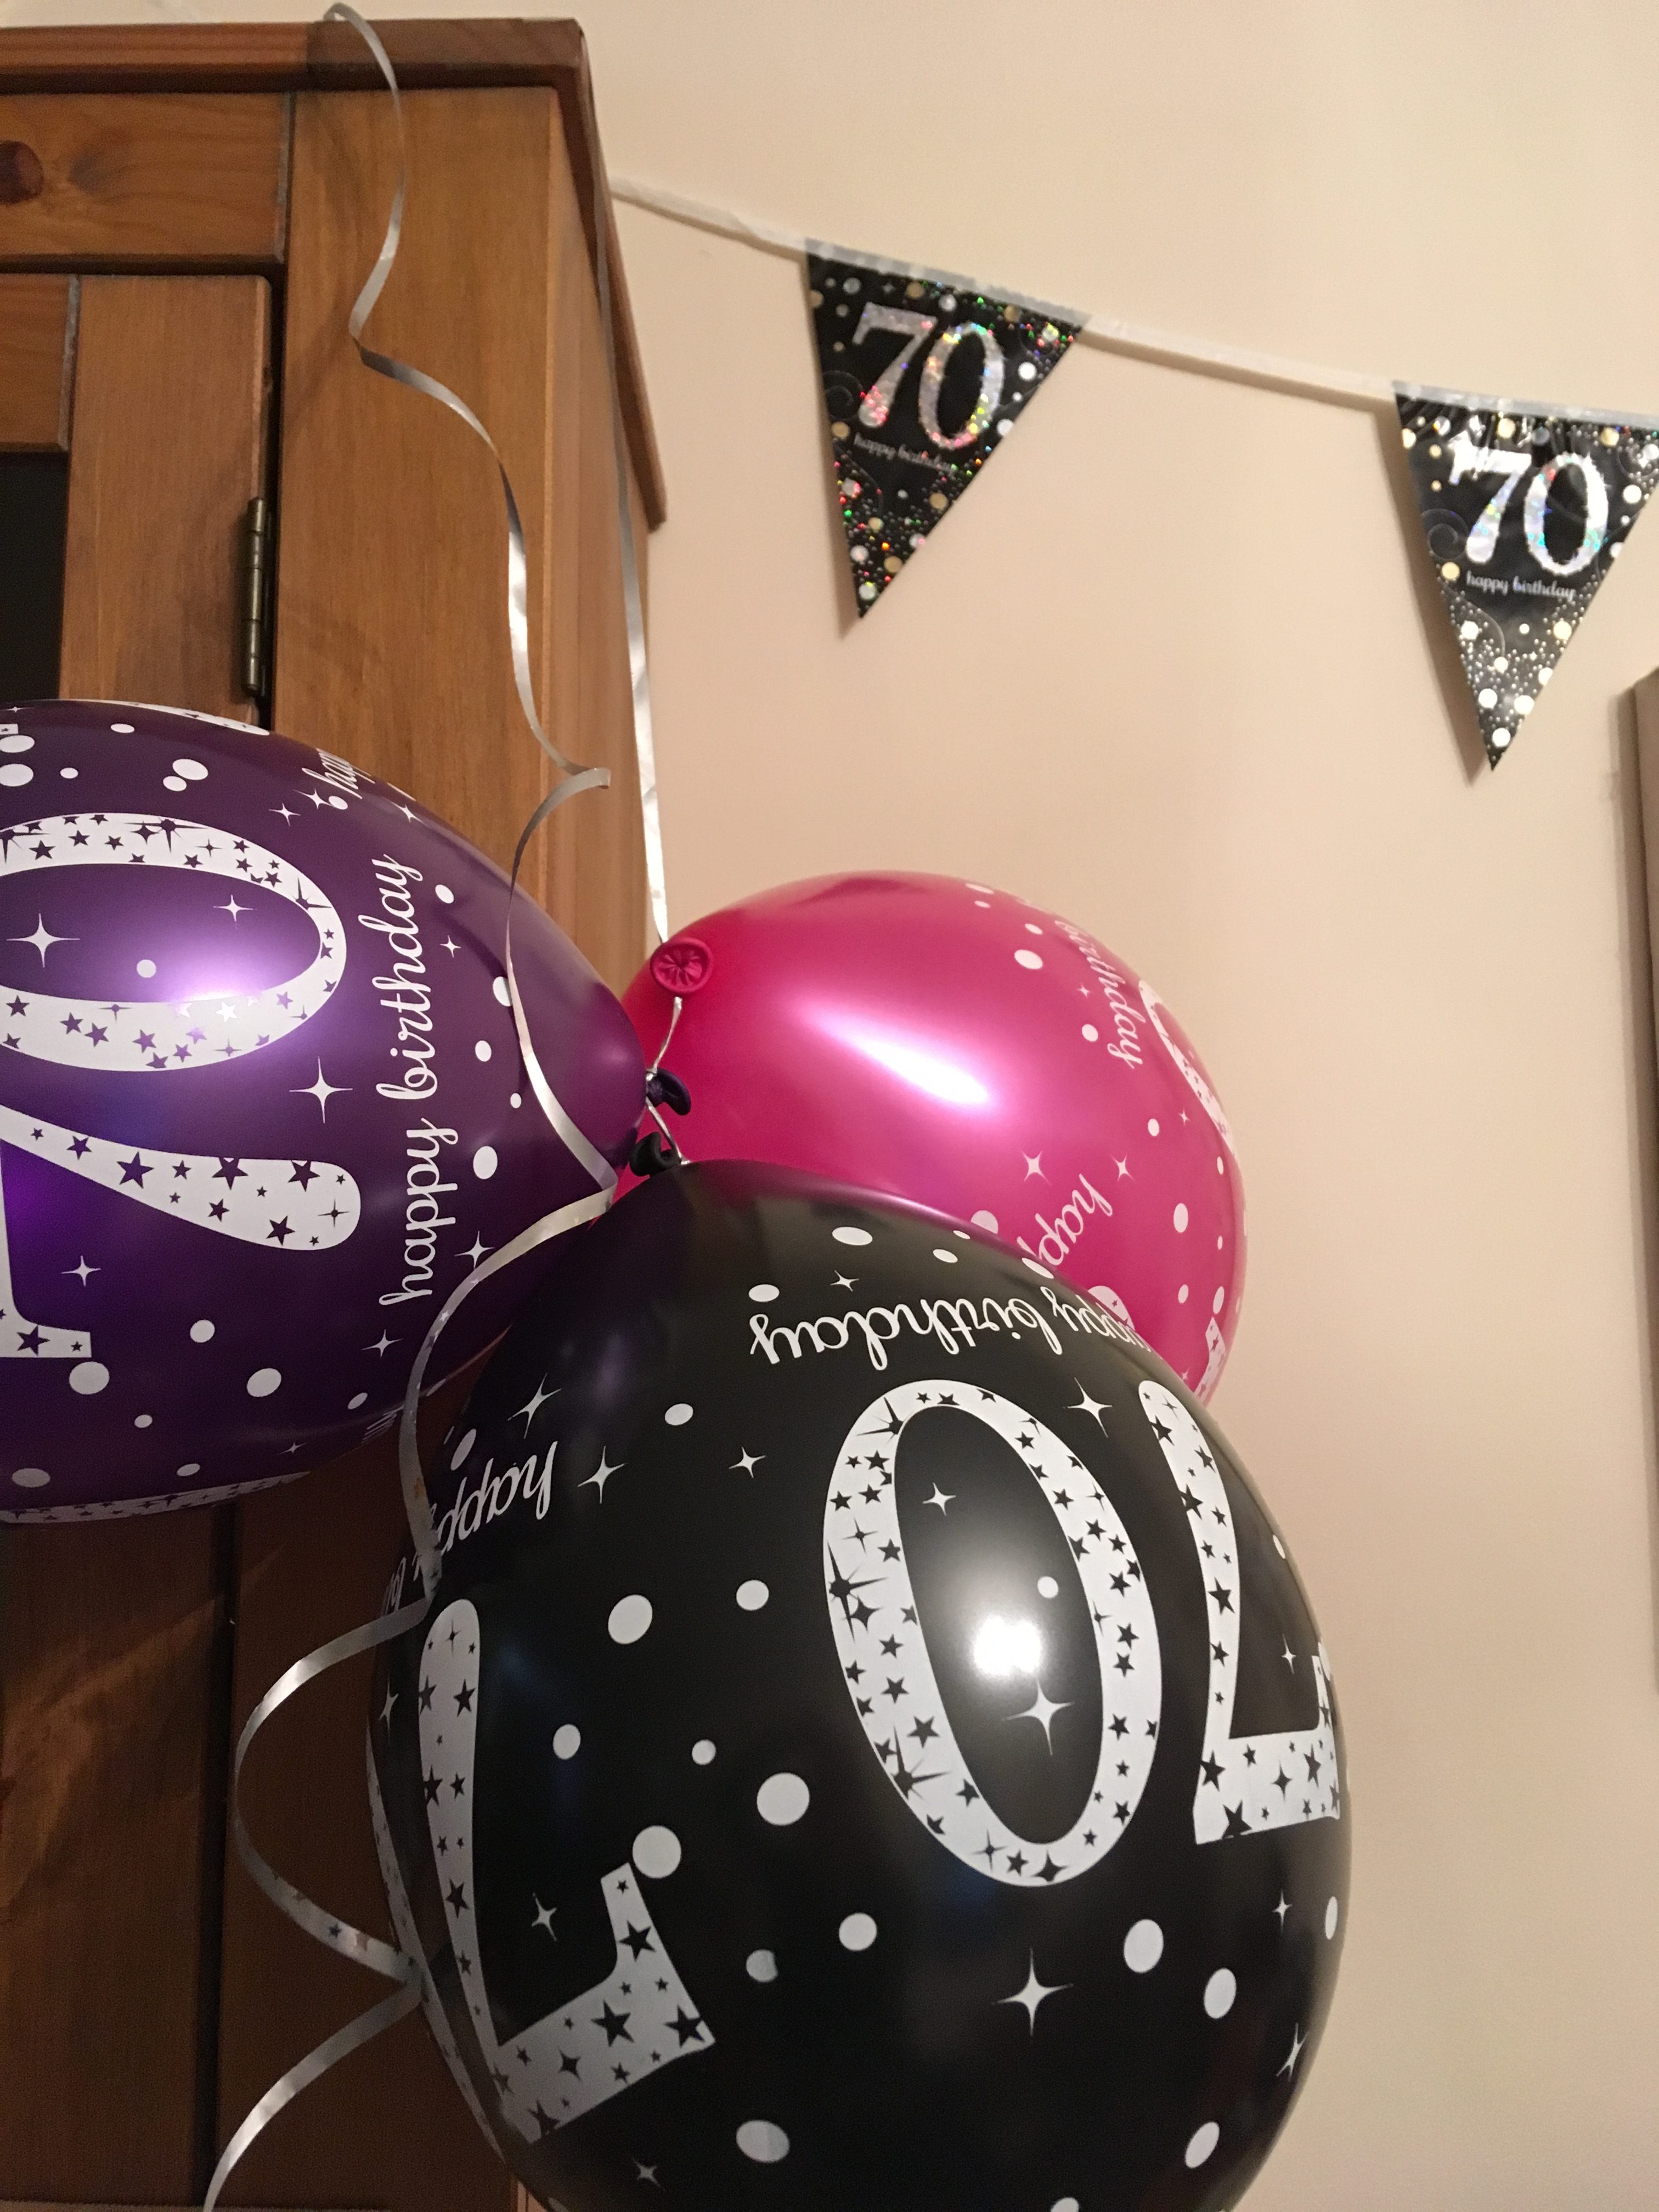 The 70th Birthday Balloons and banner for my mum.